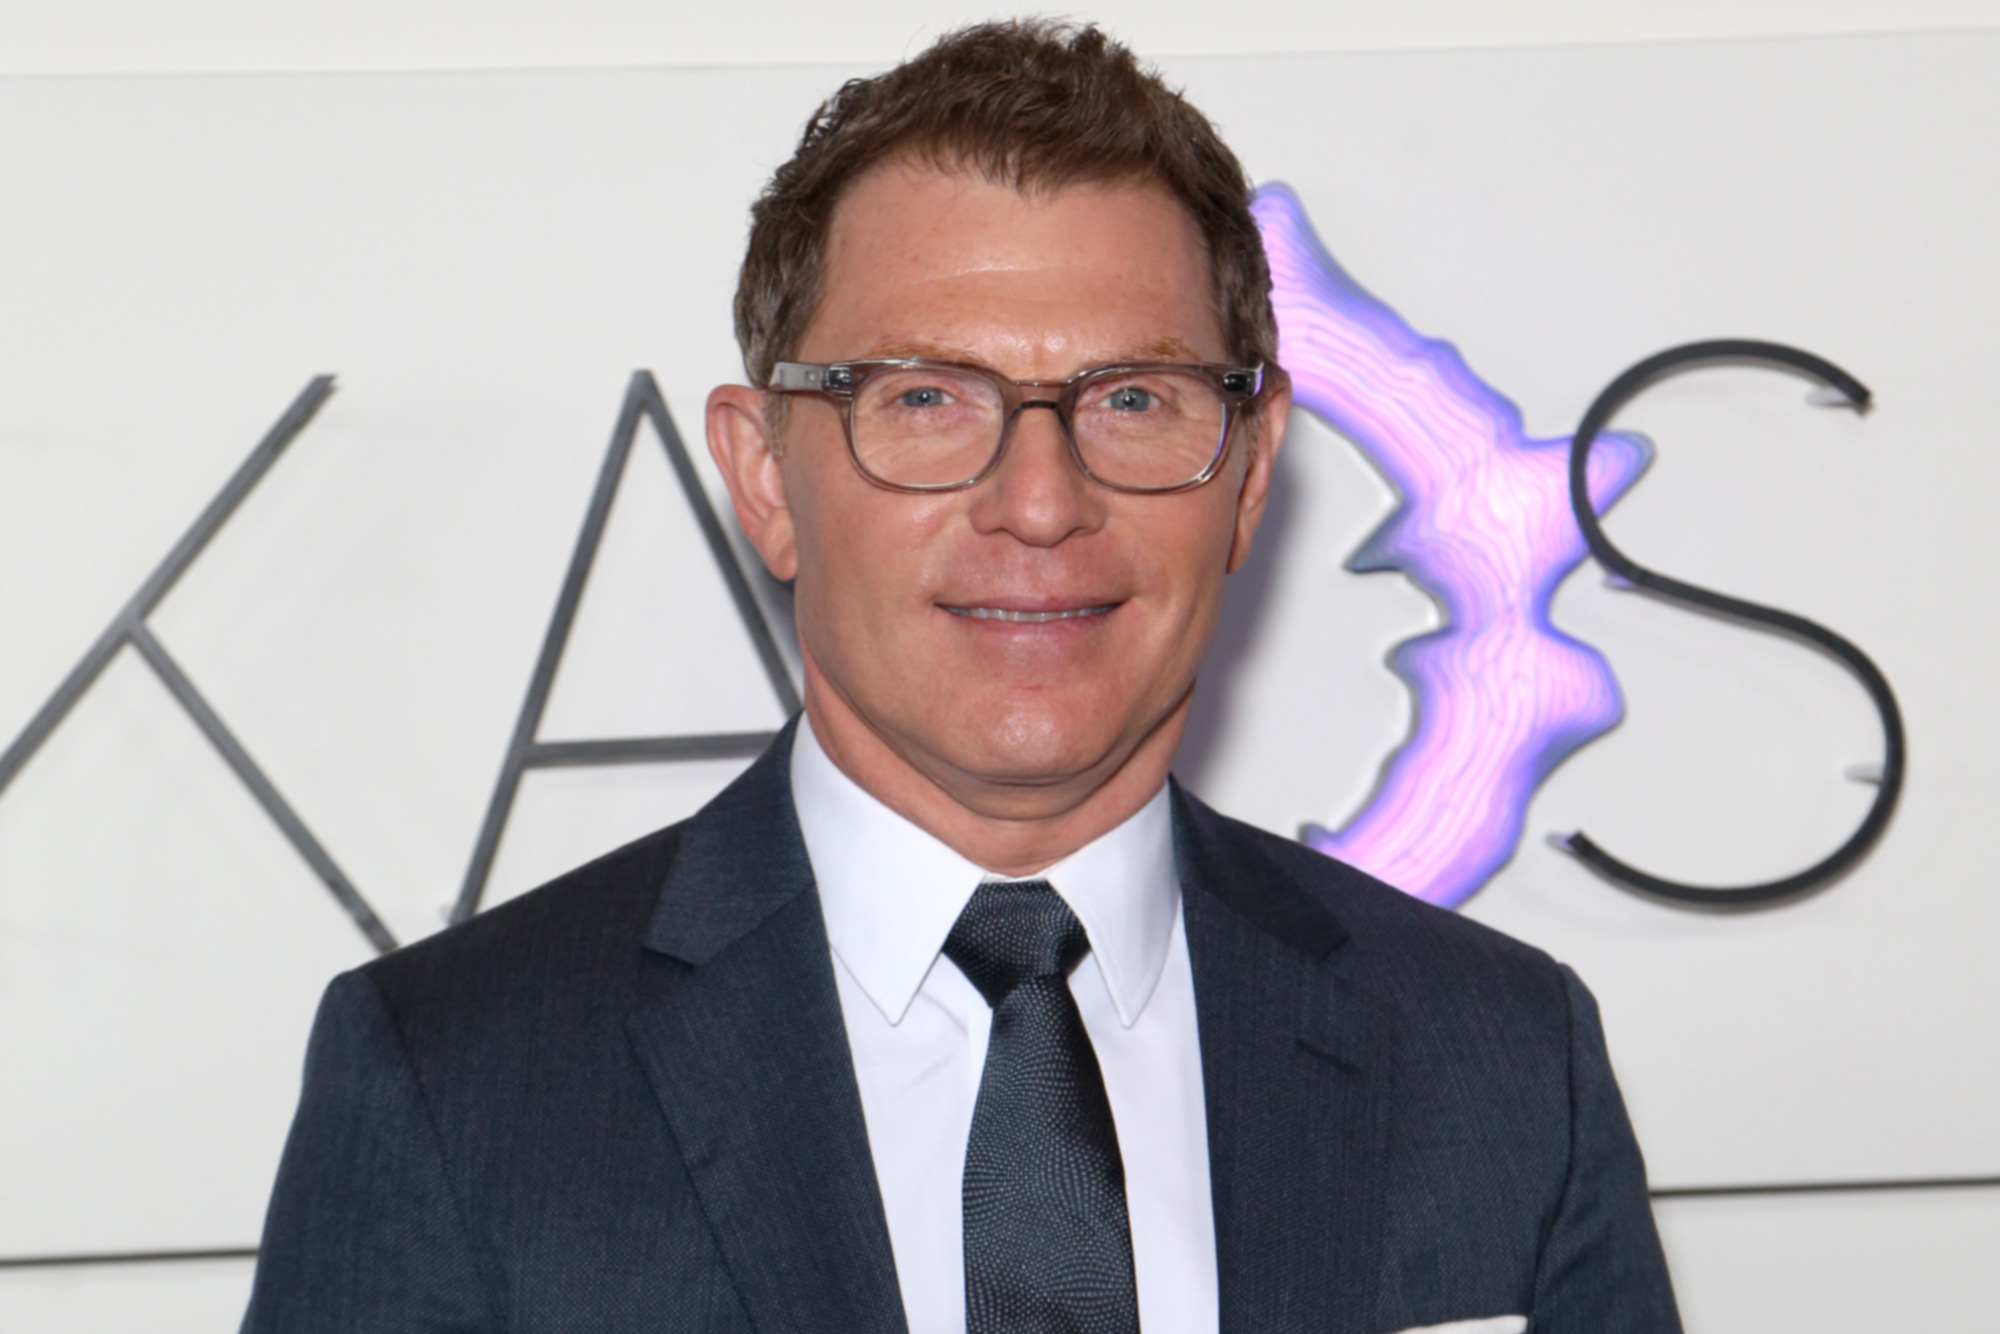 Bobby Flay sings 'Happy Birthday' for guest at Melba Wilson's Harlem eatery